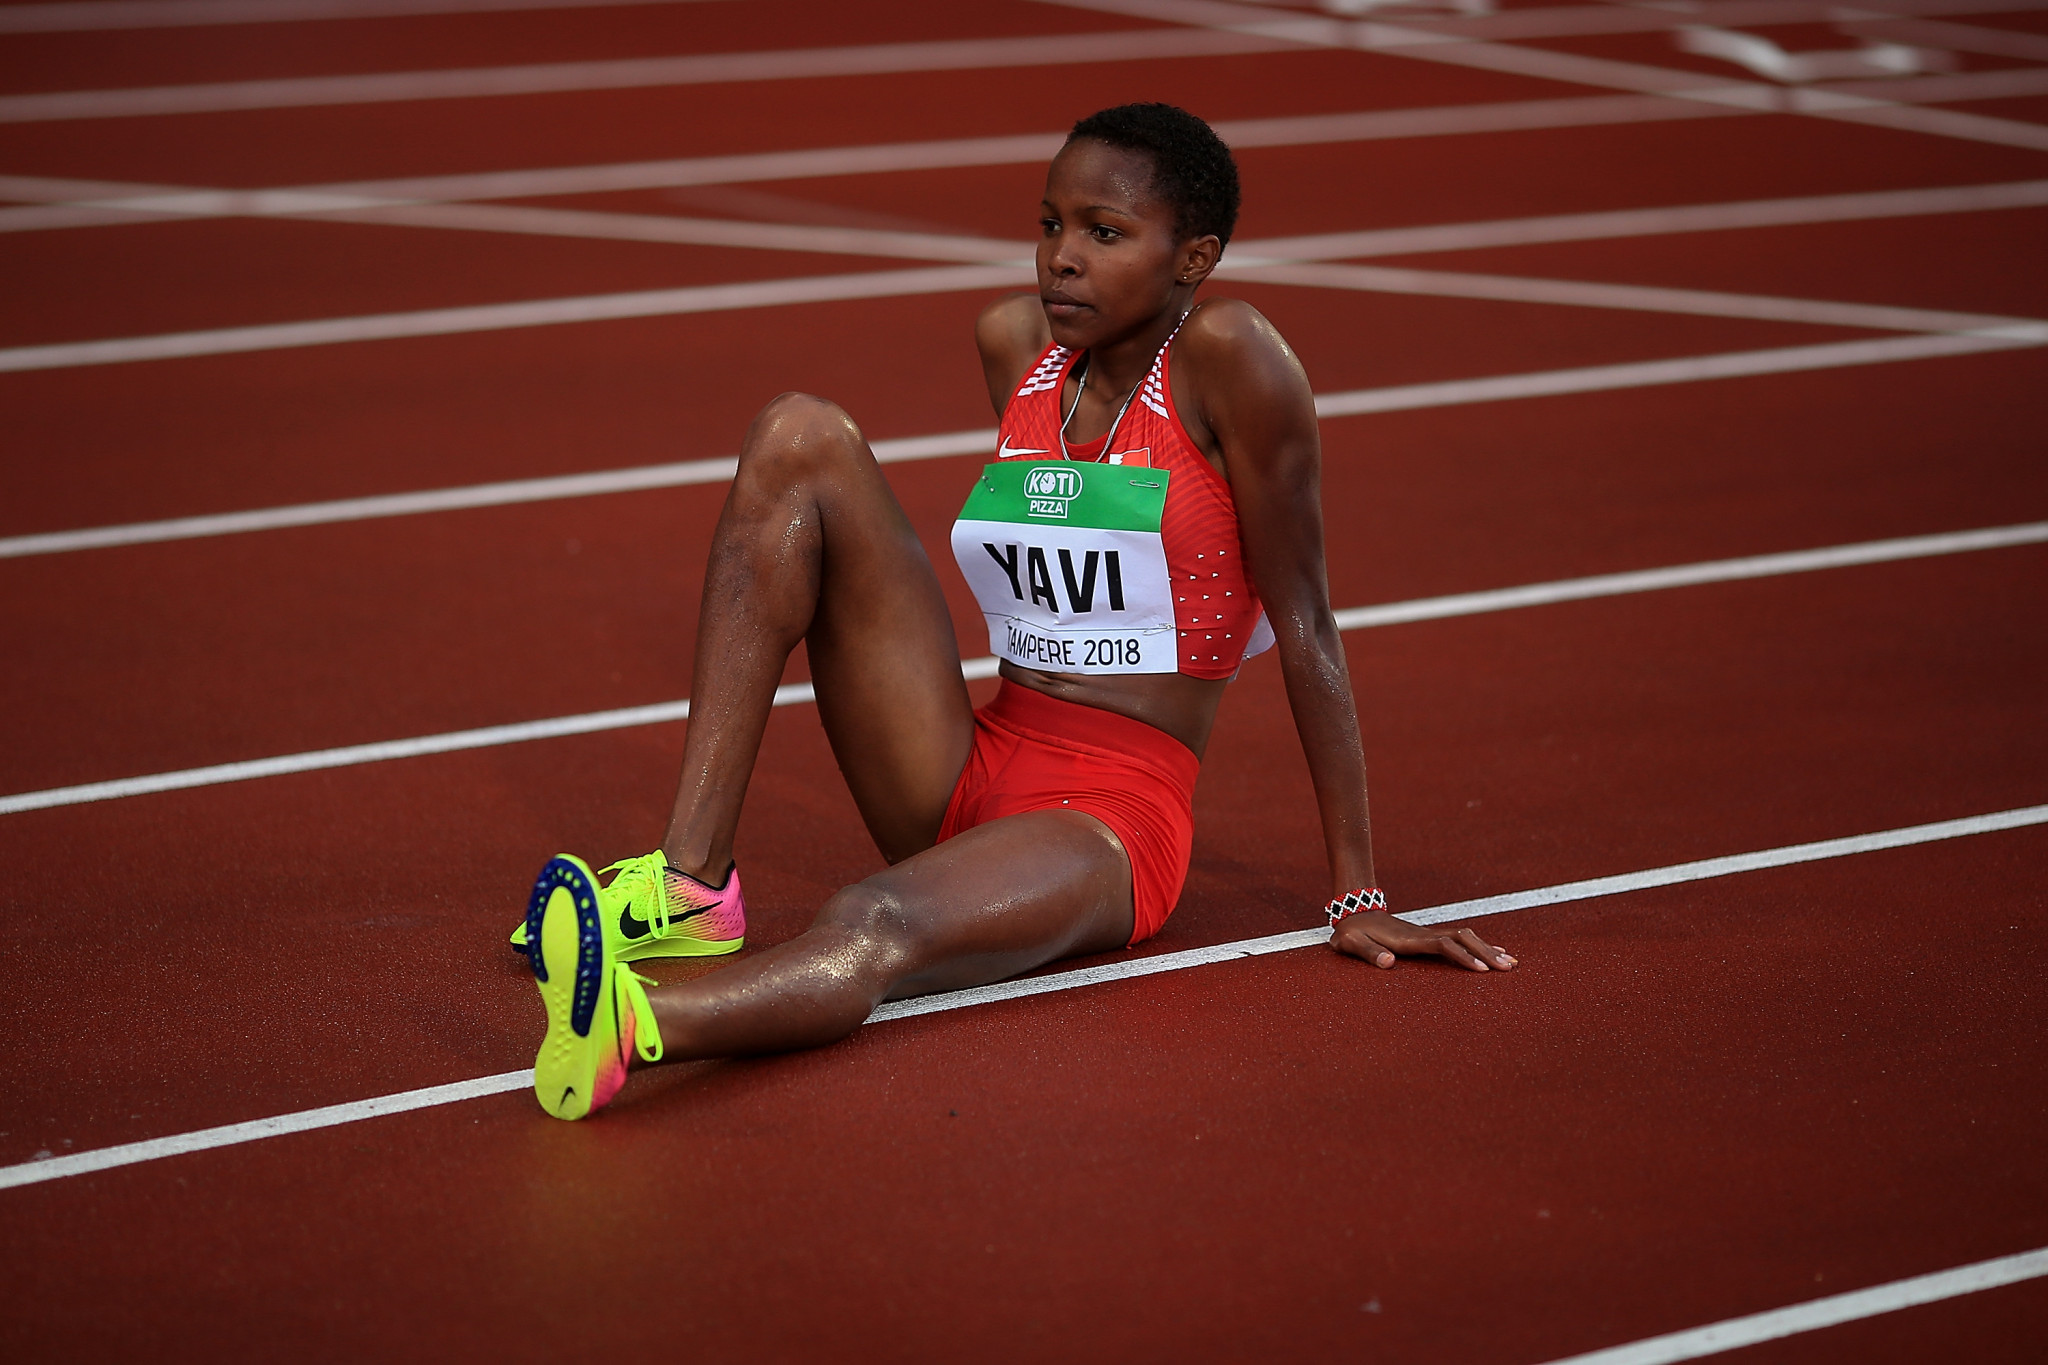 Asian Games champion Winfred Mutile Yavi won the women's race by eight seconds ©Getty Images